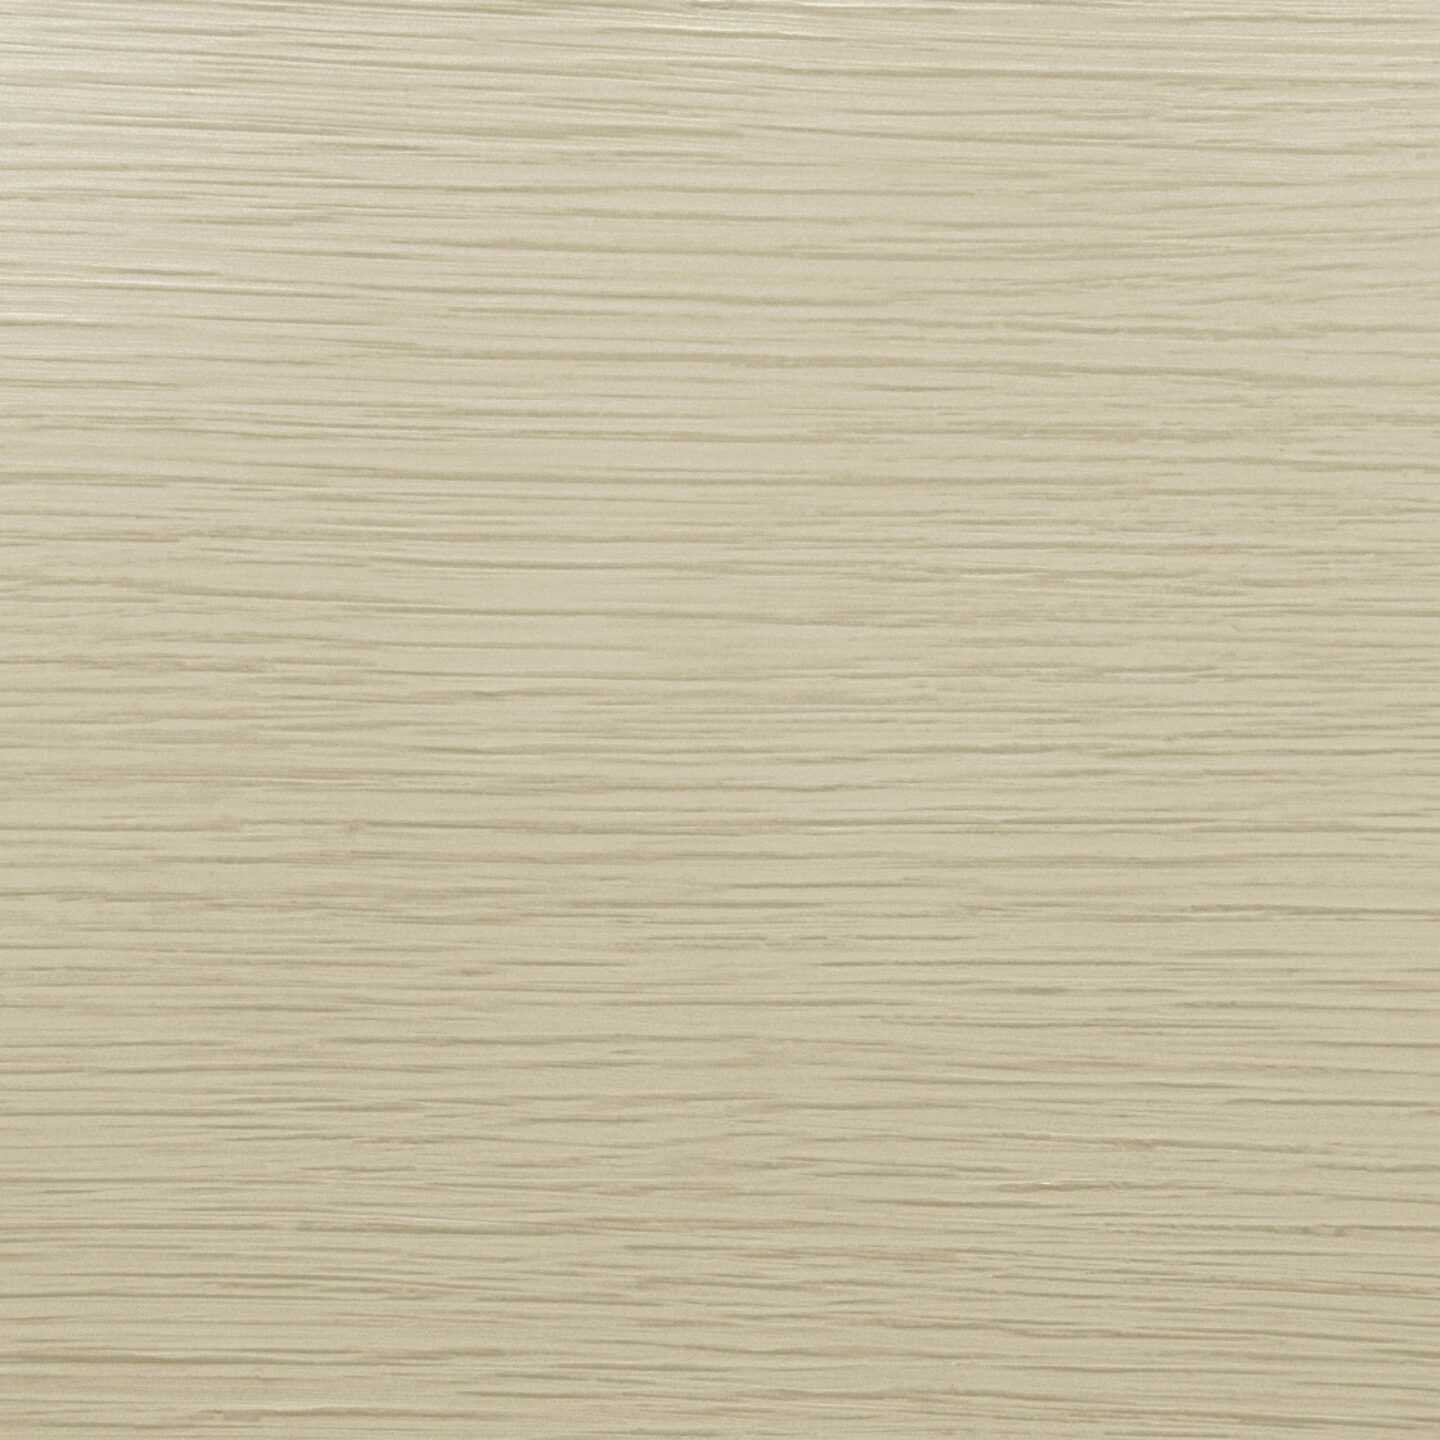 Close up of Armourcoat Striated polished plaster finish - 06